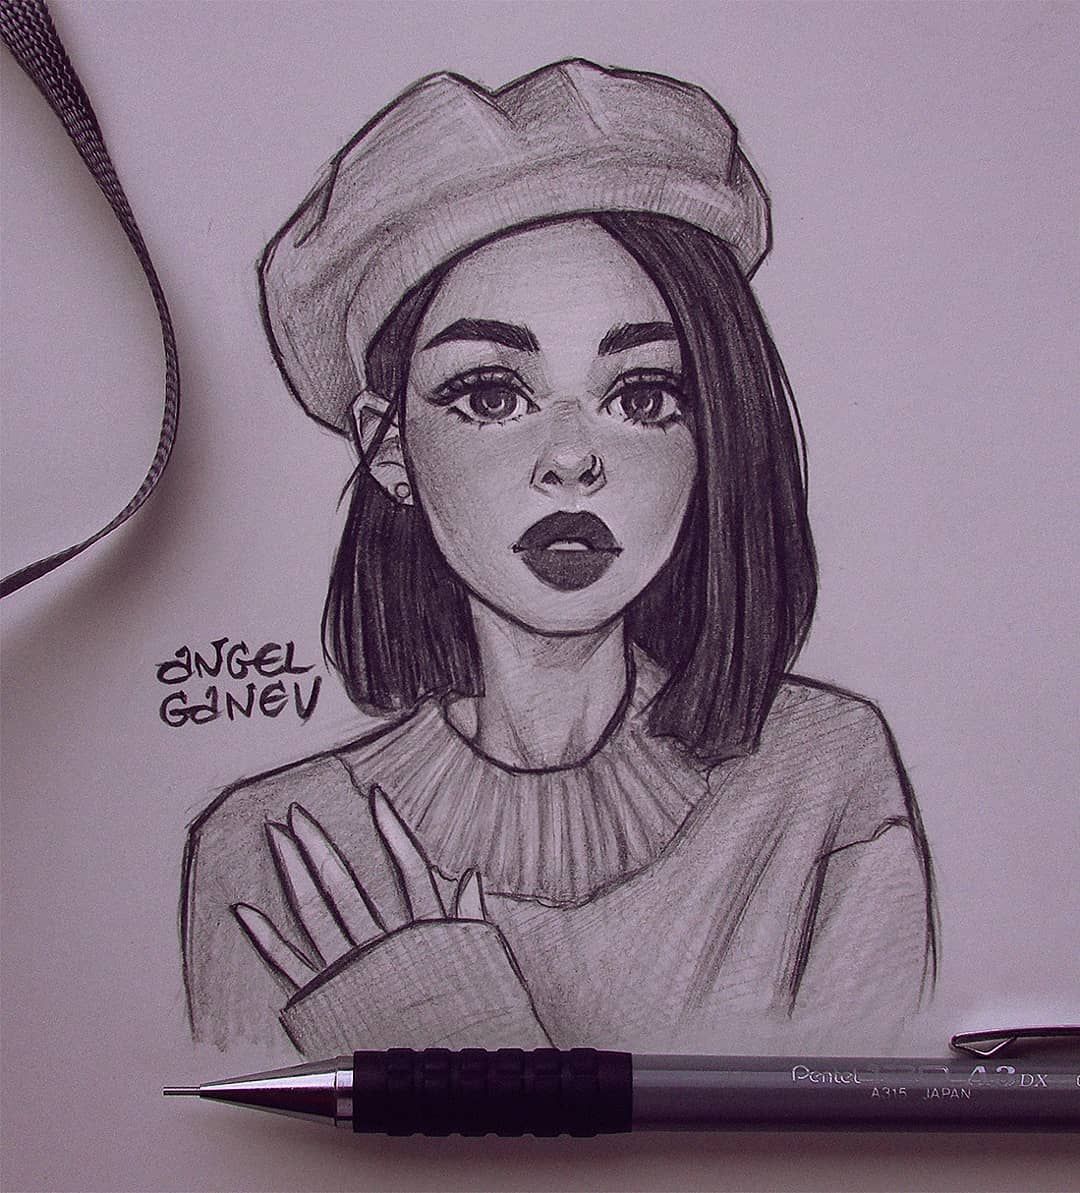 Angel Ganev on Instagram: “Traditional vs Digital~?✨ Which one do you like better?? Reference from @snitchery ? . I wanted to compare my traditional sketches with my…”